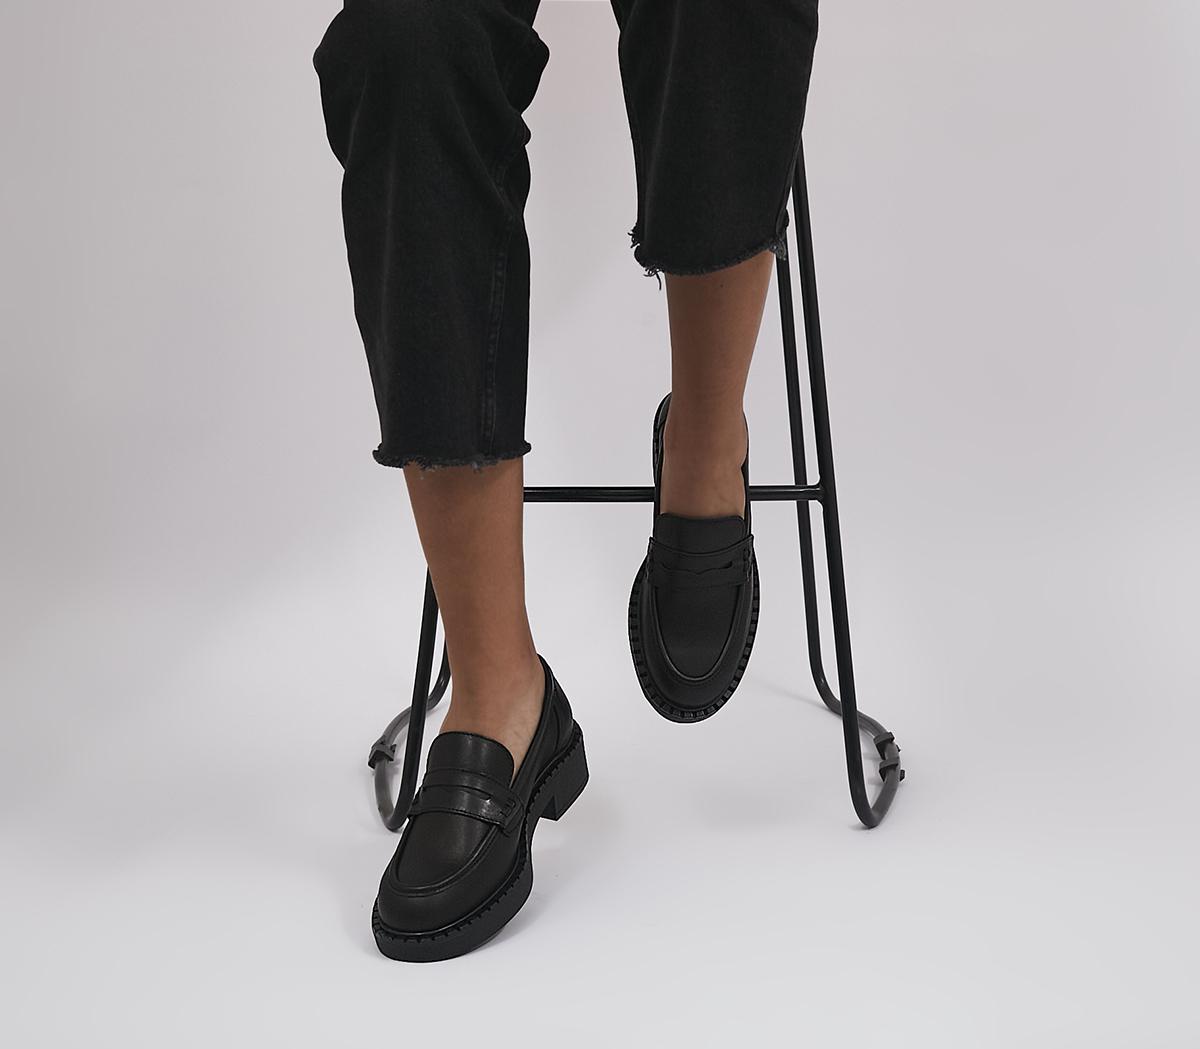 OFFICEWide Fit Favour Chunky LoafersBlack Leather